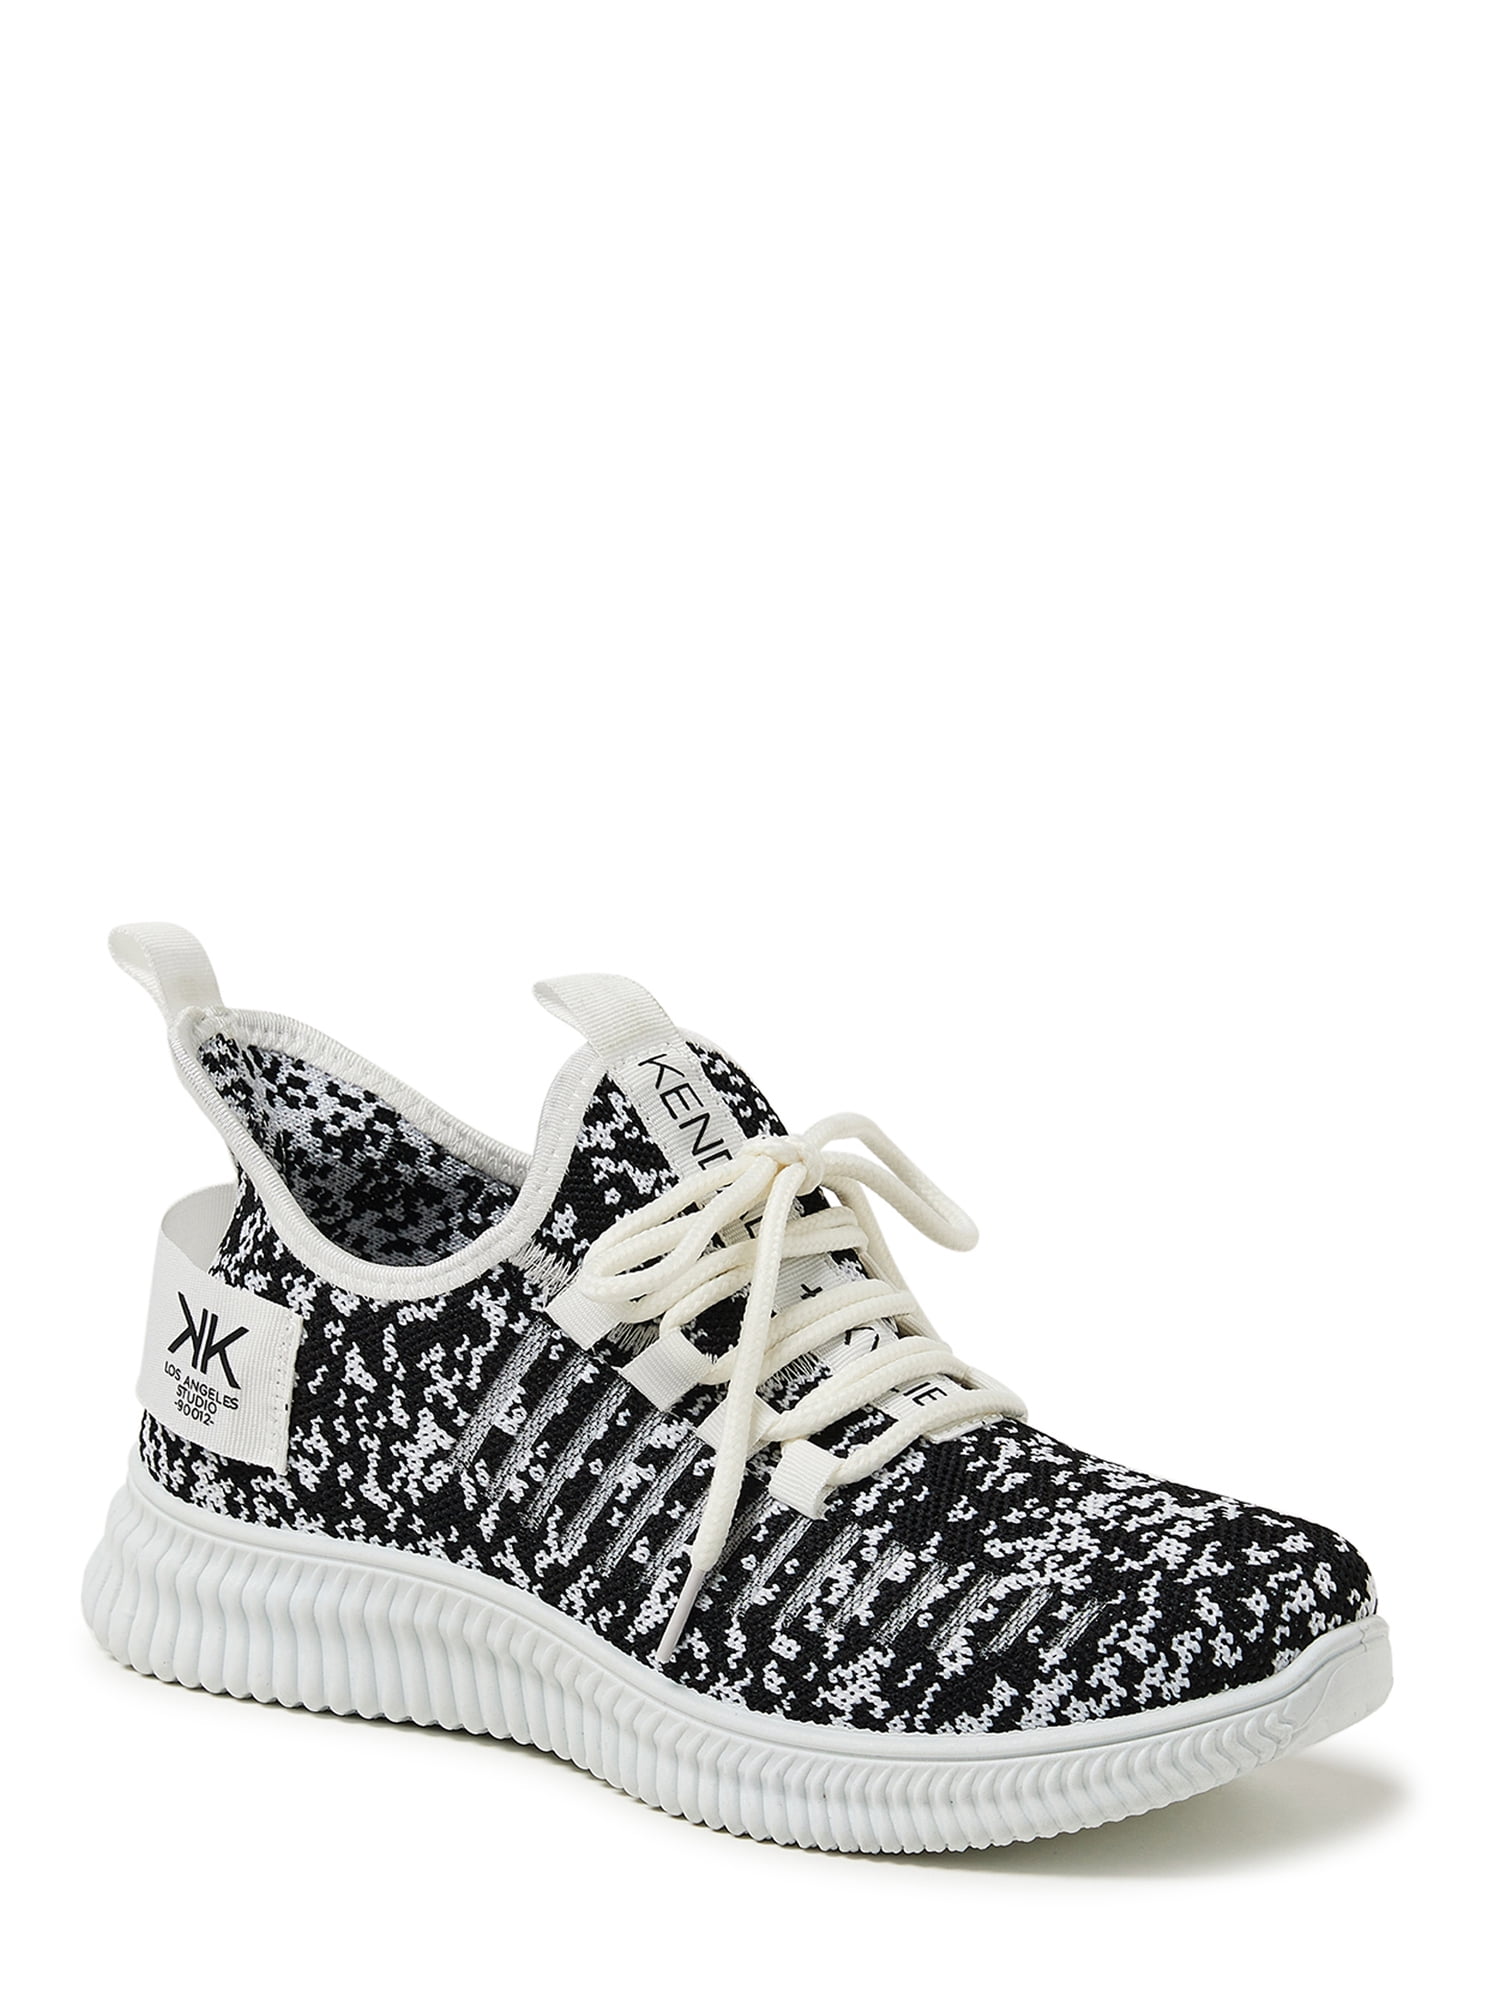 Forholdsvis sundhed Dokument Kendall + Kylie Women's Ezora Knit Sneakers - Walmart.com